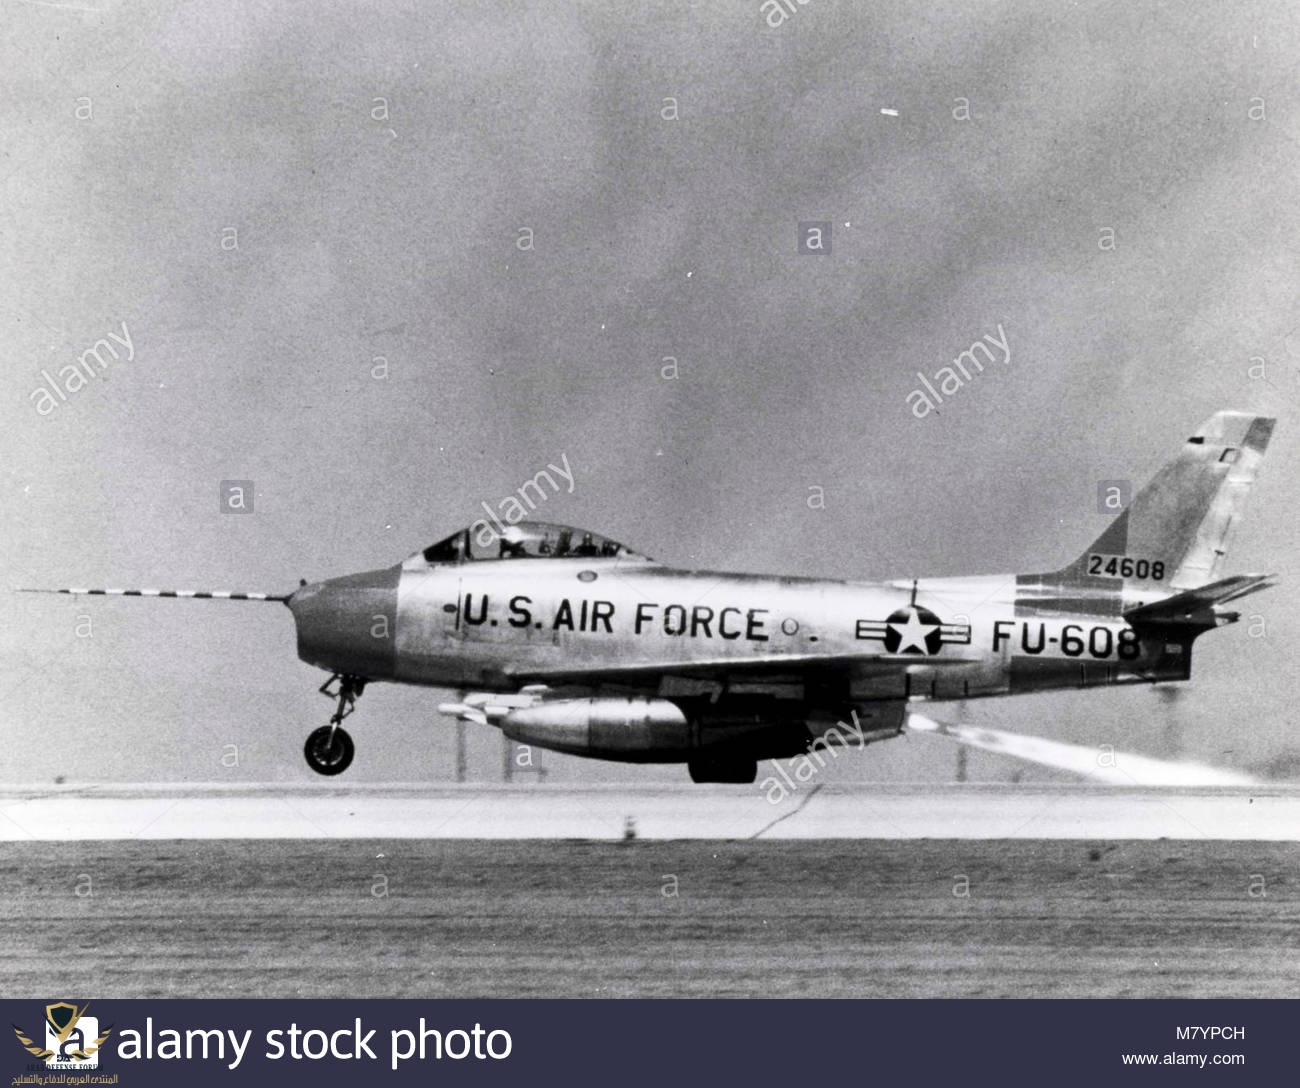 north-american-f-86f-30-na-sabre-sn-52-4608-rocket-assisted-take-off-M7YPCH-1.jpg